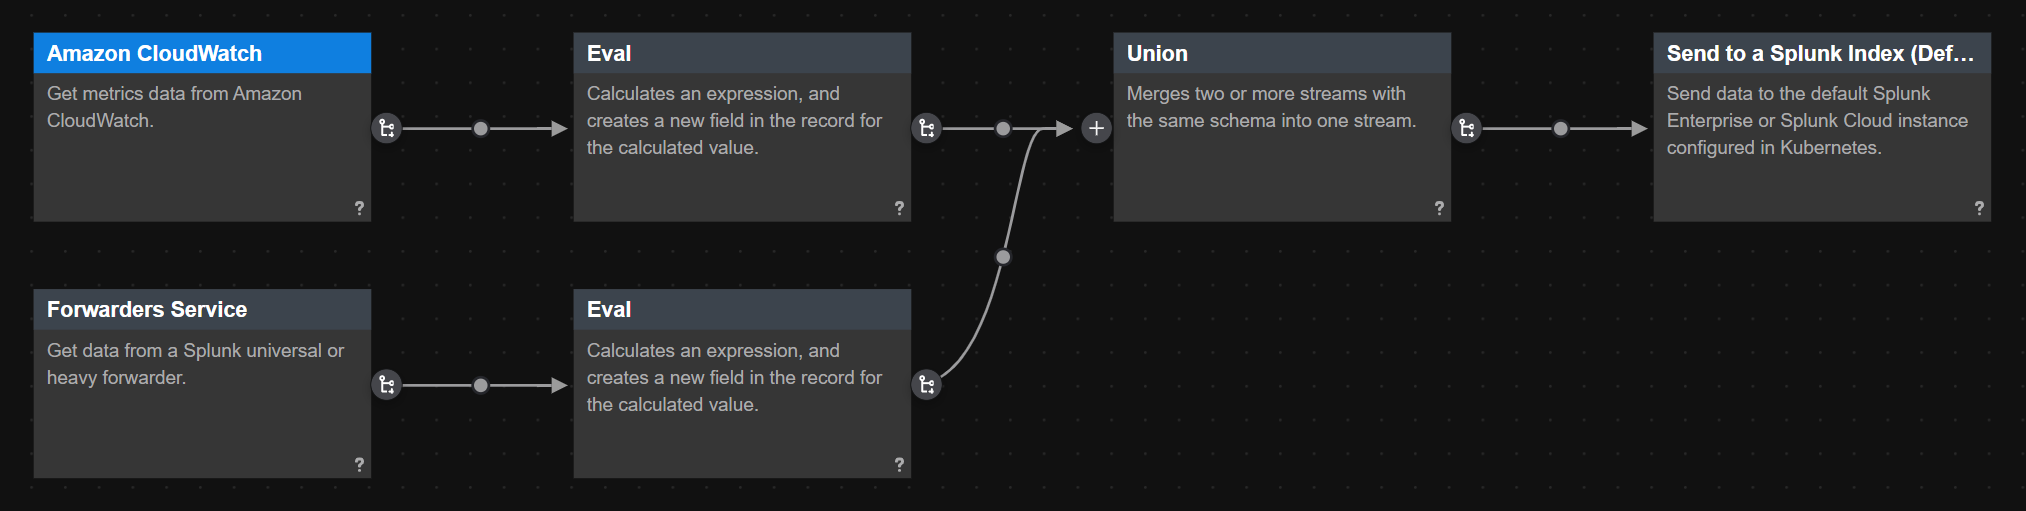 This screen image shows two data streams from two different data sources being unioned together in a pipeline.